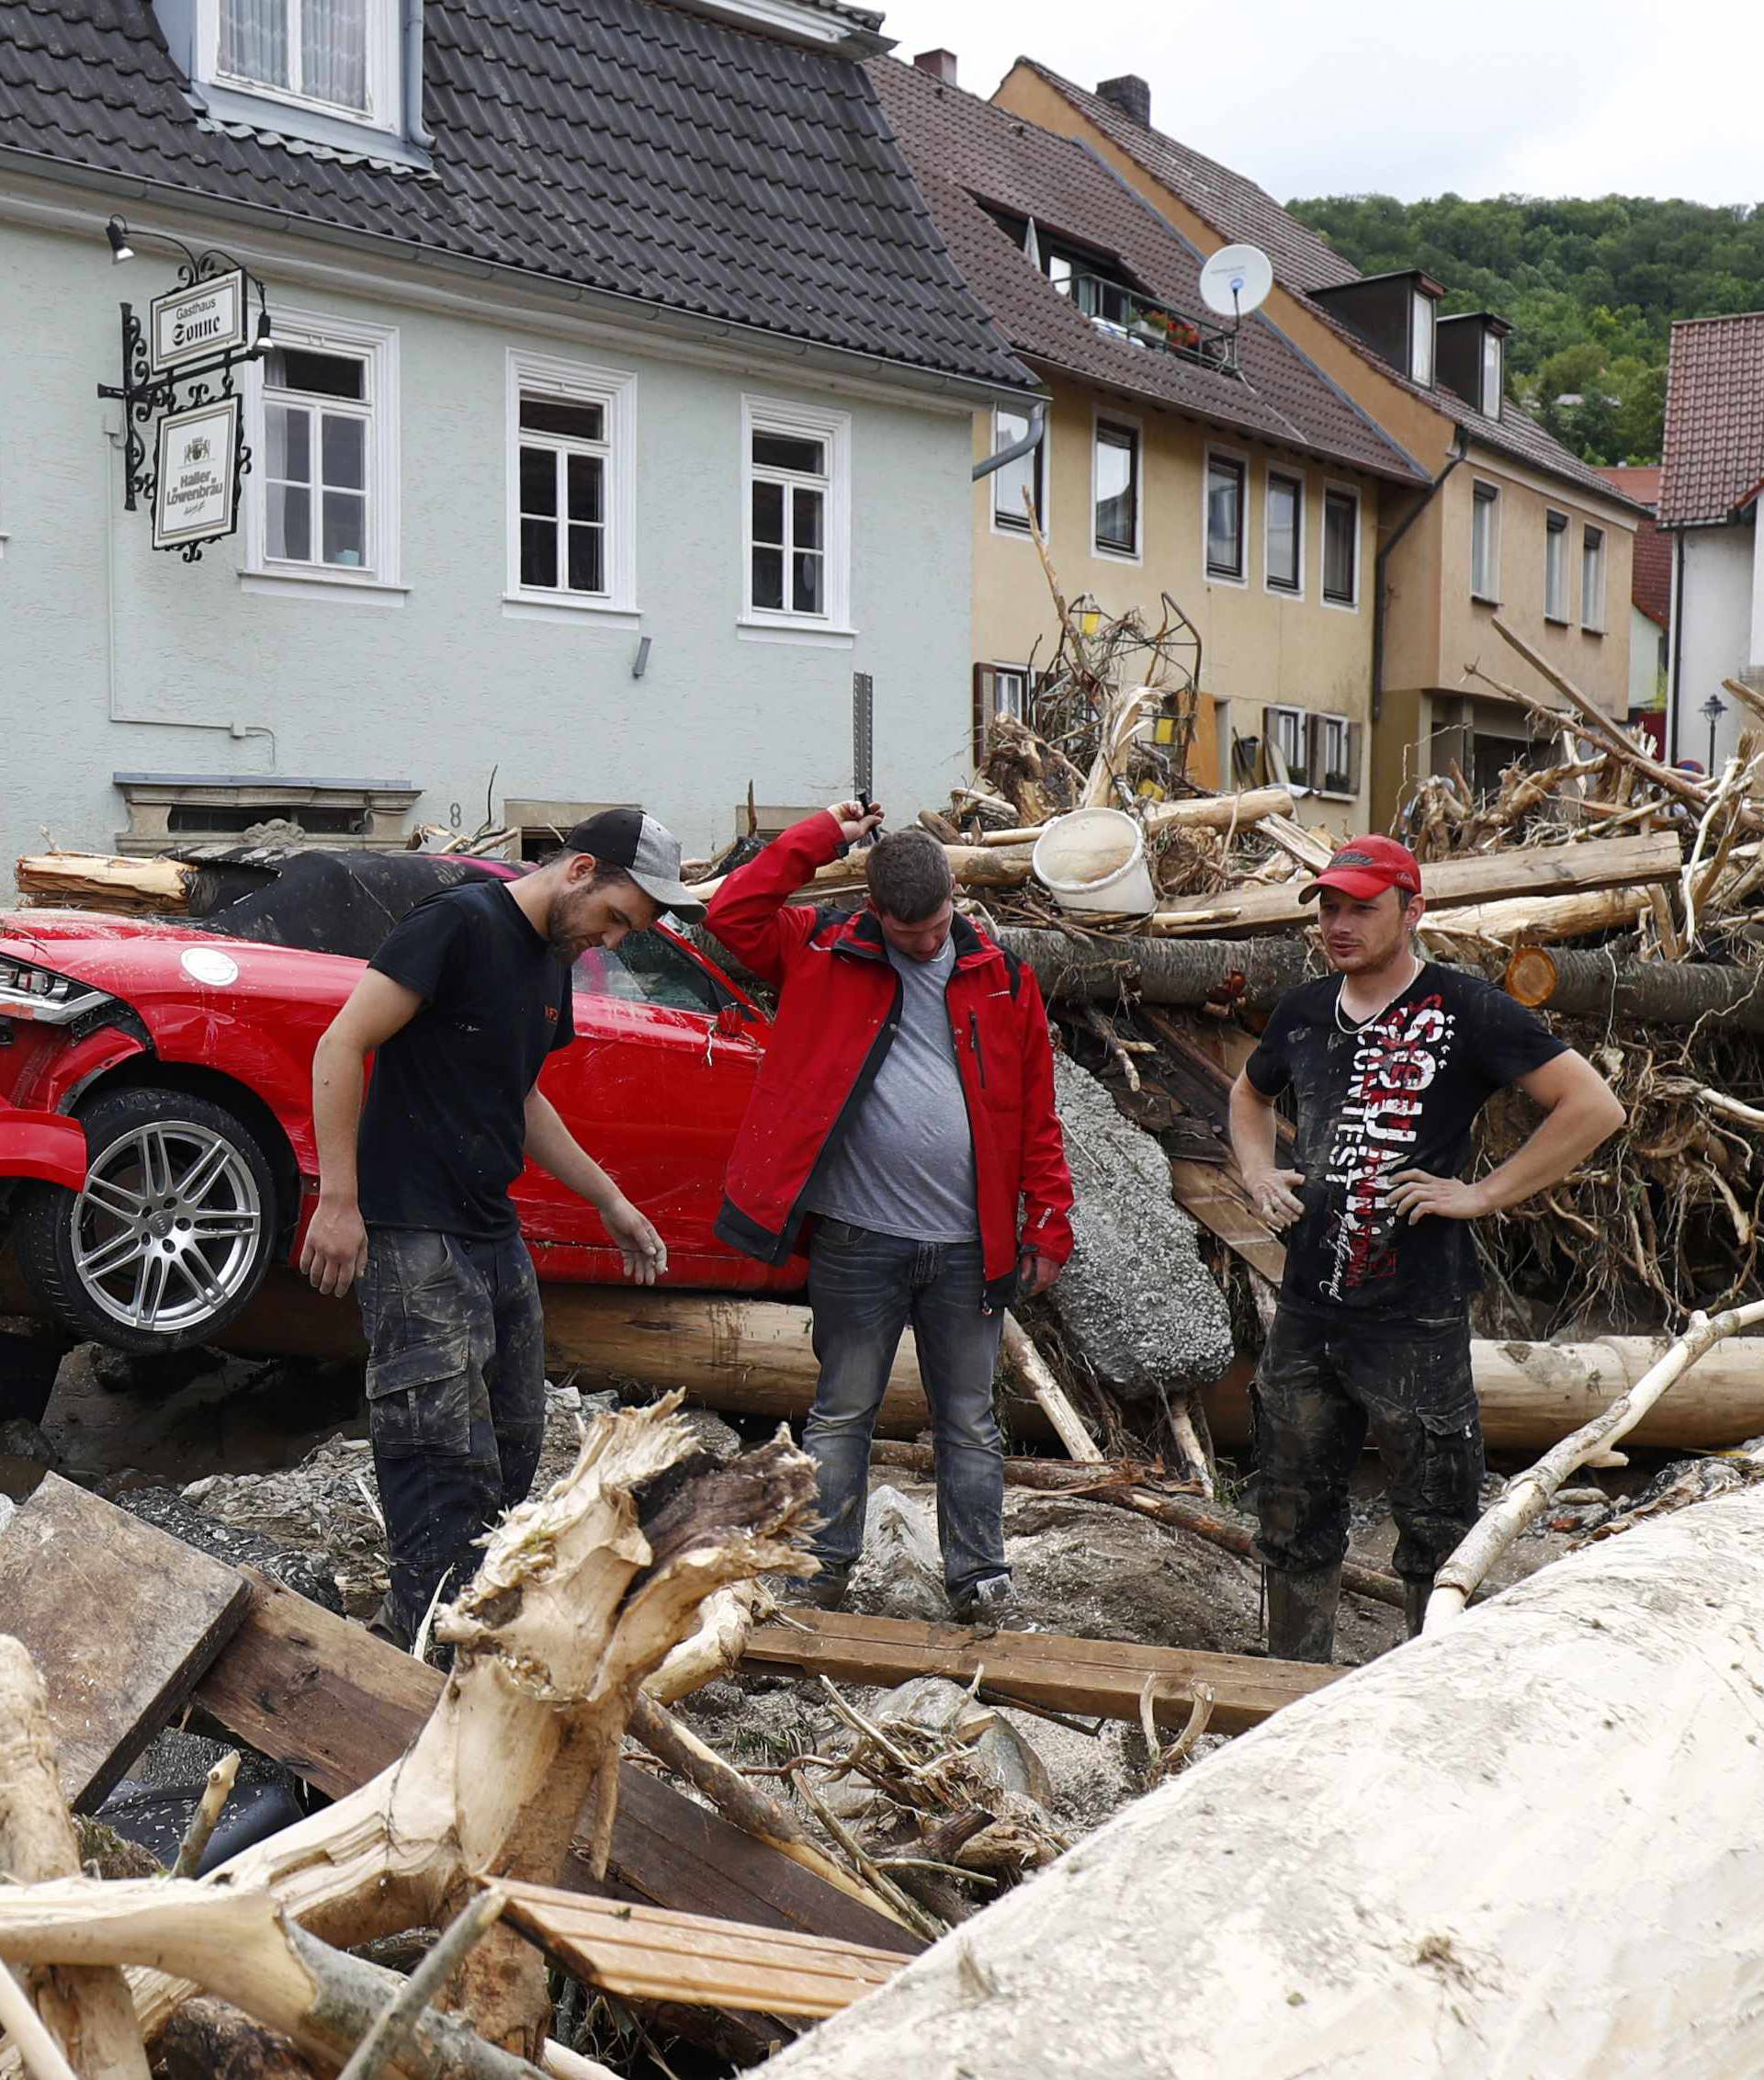 People look at the damage caused by the floods in the town of Braunsbach in Baden-Wuerttemberg